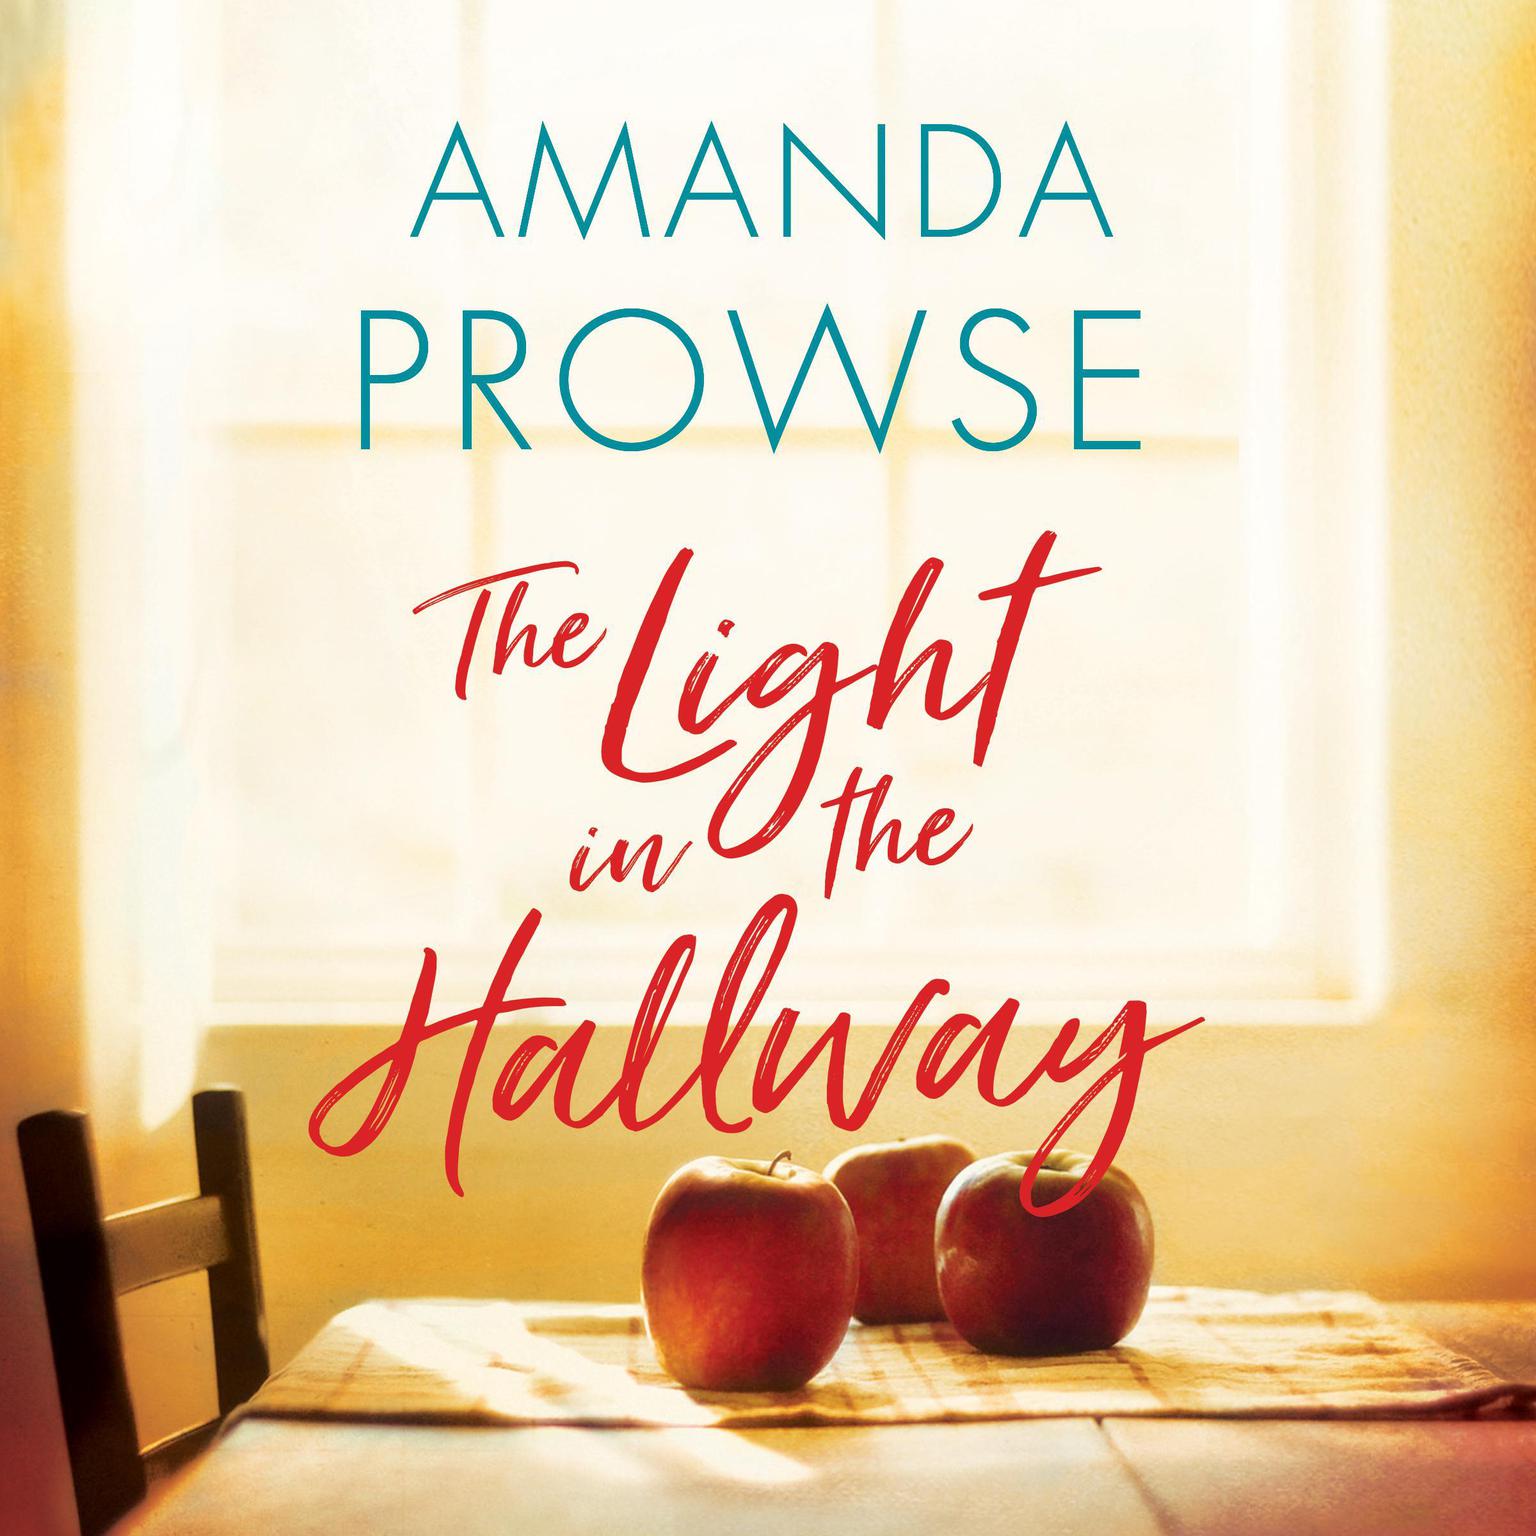 The Light in the Hallway Audiobook, by Amanda Prowse